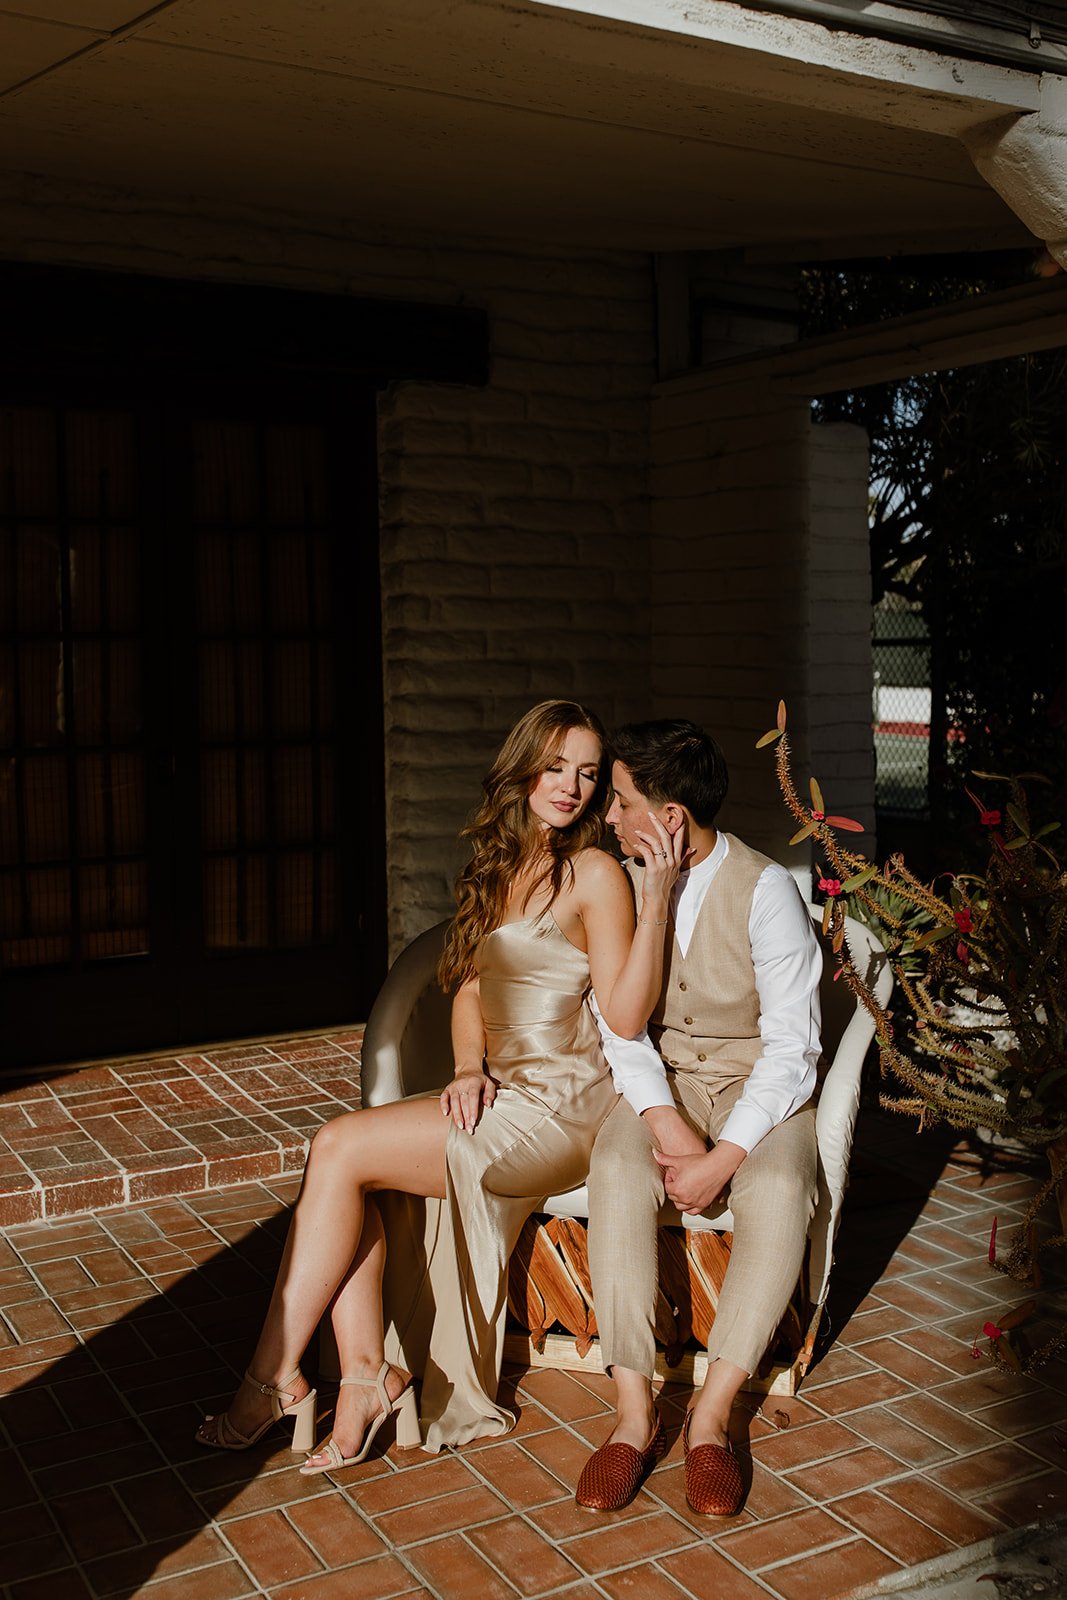 Allie and Ash_s Wedding at Cree Estate Palm Springs - Eve Rox Photography-6.jpg